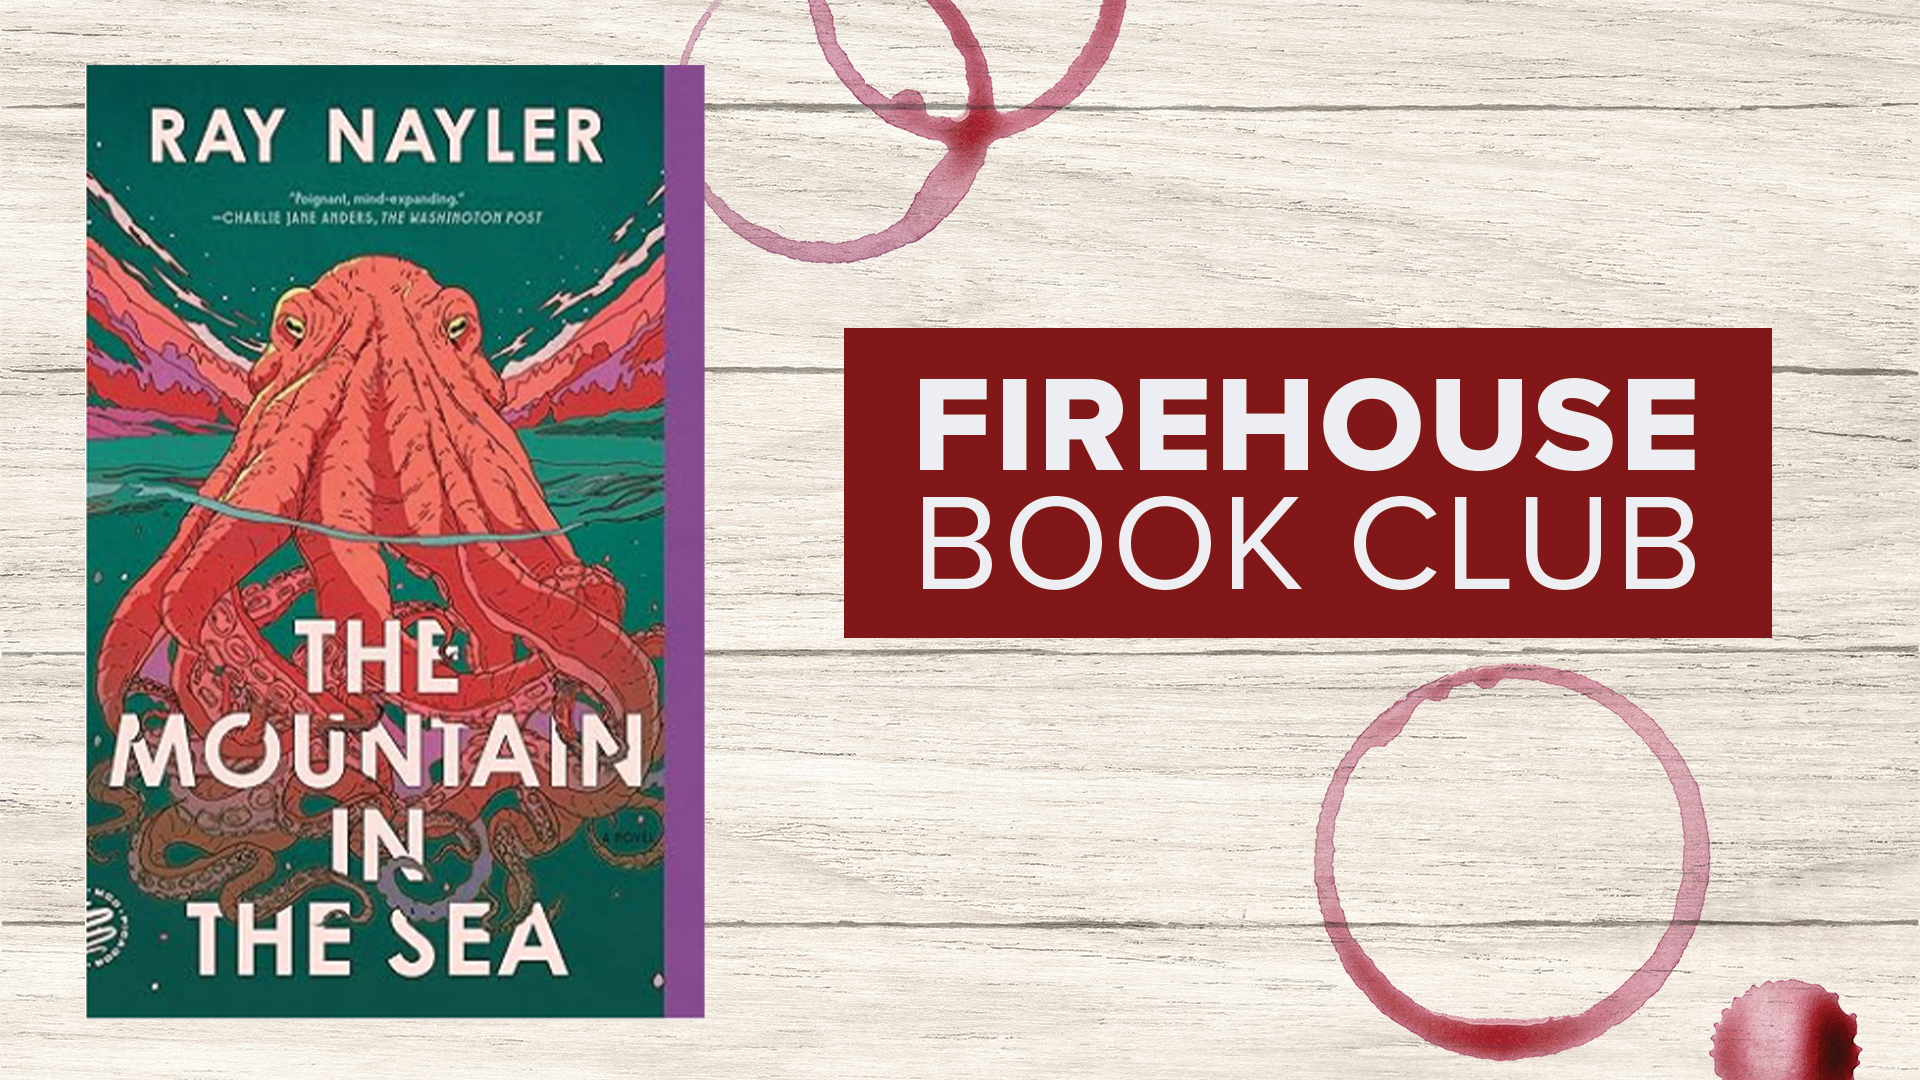 Firehouse Book Club - The Mountain in the Sea